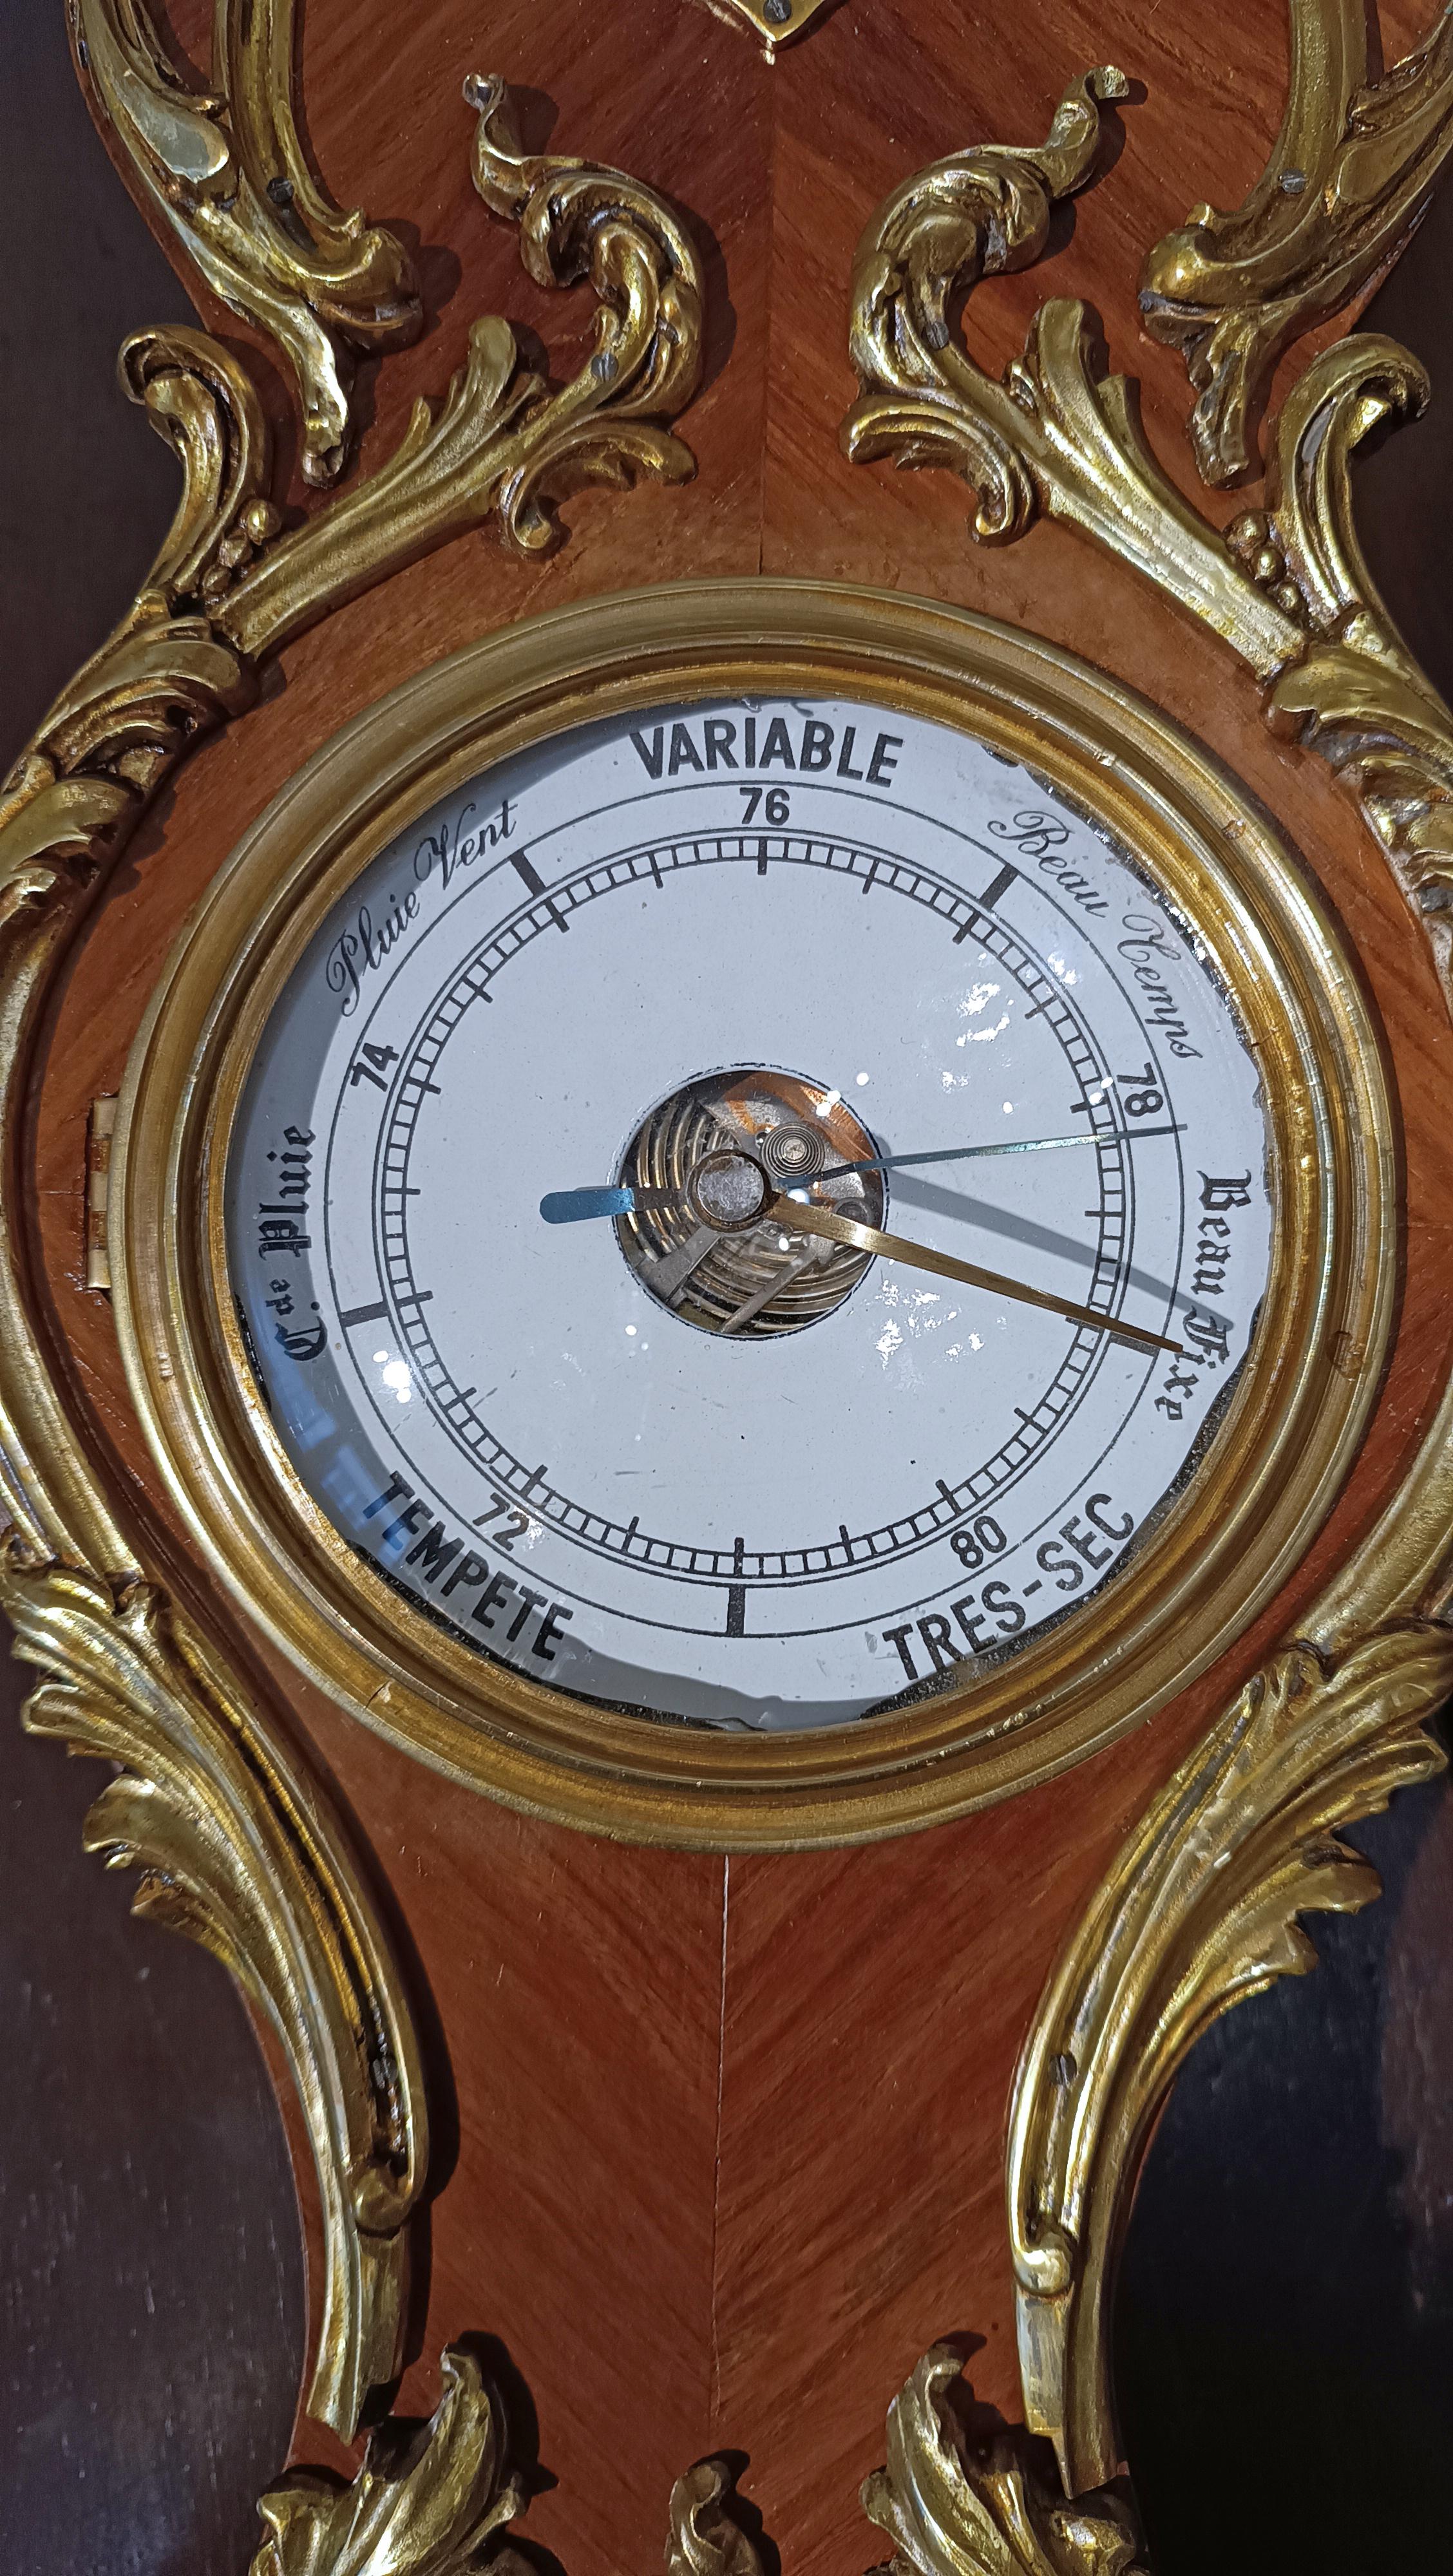 This beautiful wall barometer with room thermometer is a highly valuable craftsmanship, attributable to French manufacture and dating back to the period of Napoleon III (approximately second half of the 19th century). Made of wood and veneered in